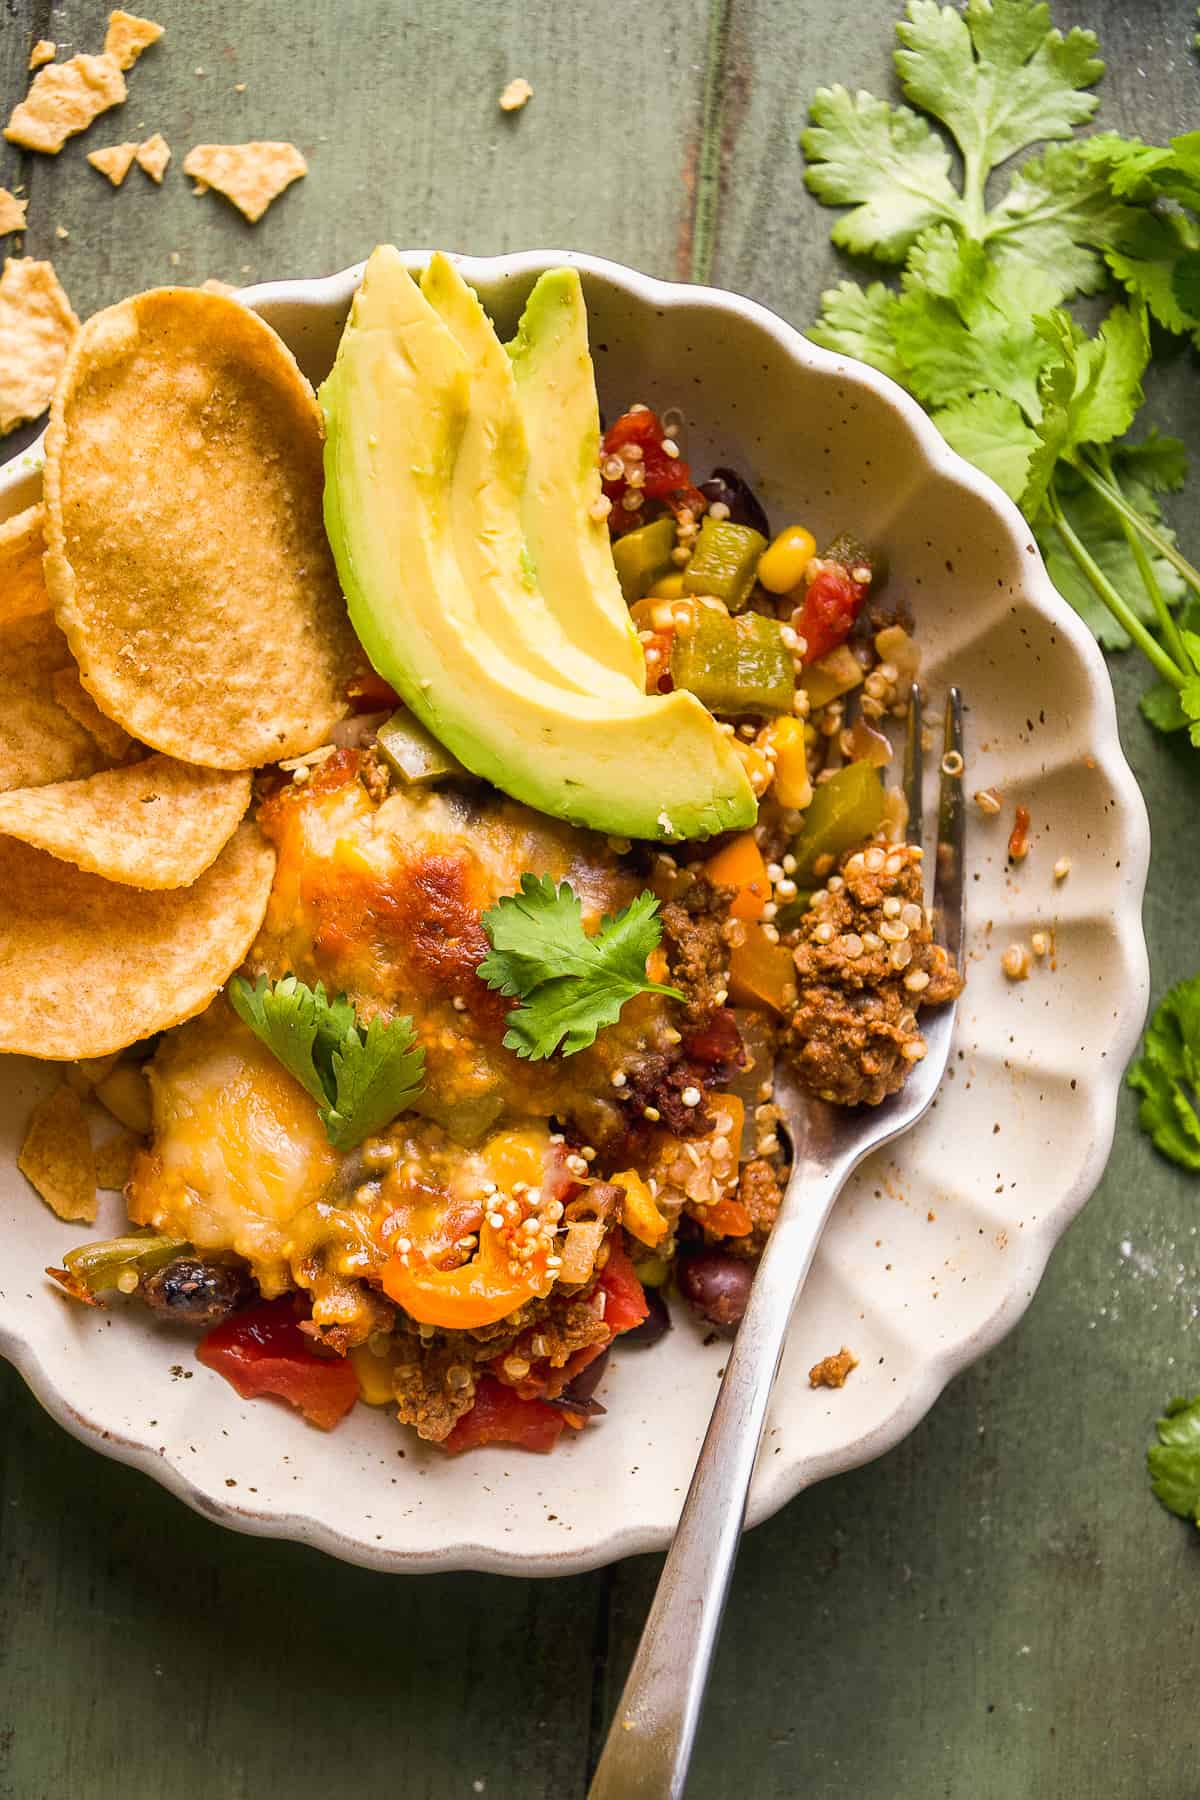 Taco casserole in a bowl with chips and avocado slices.